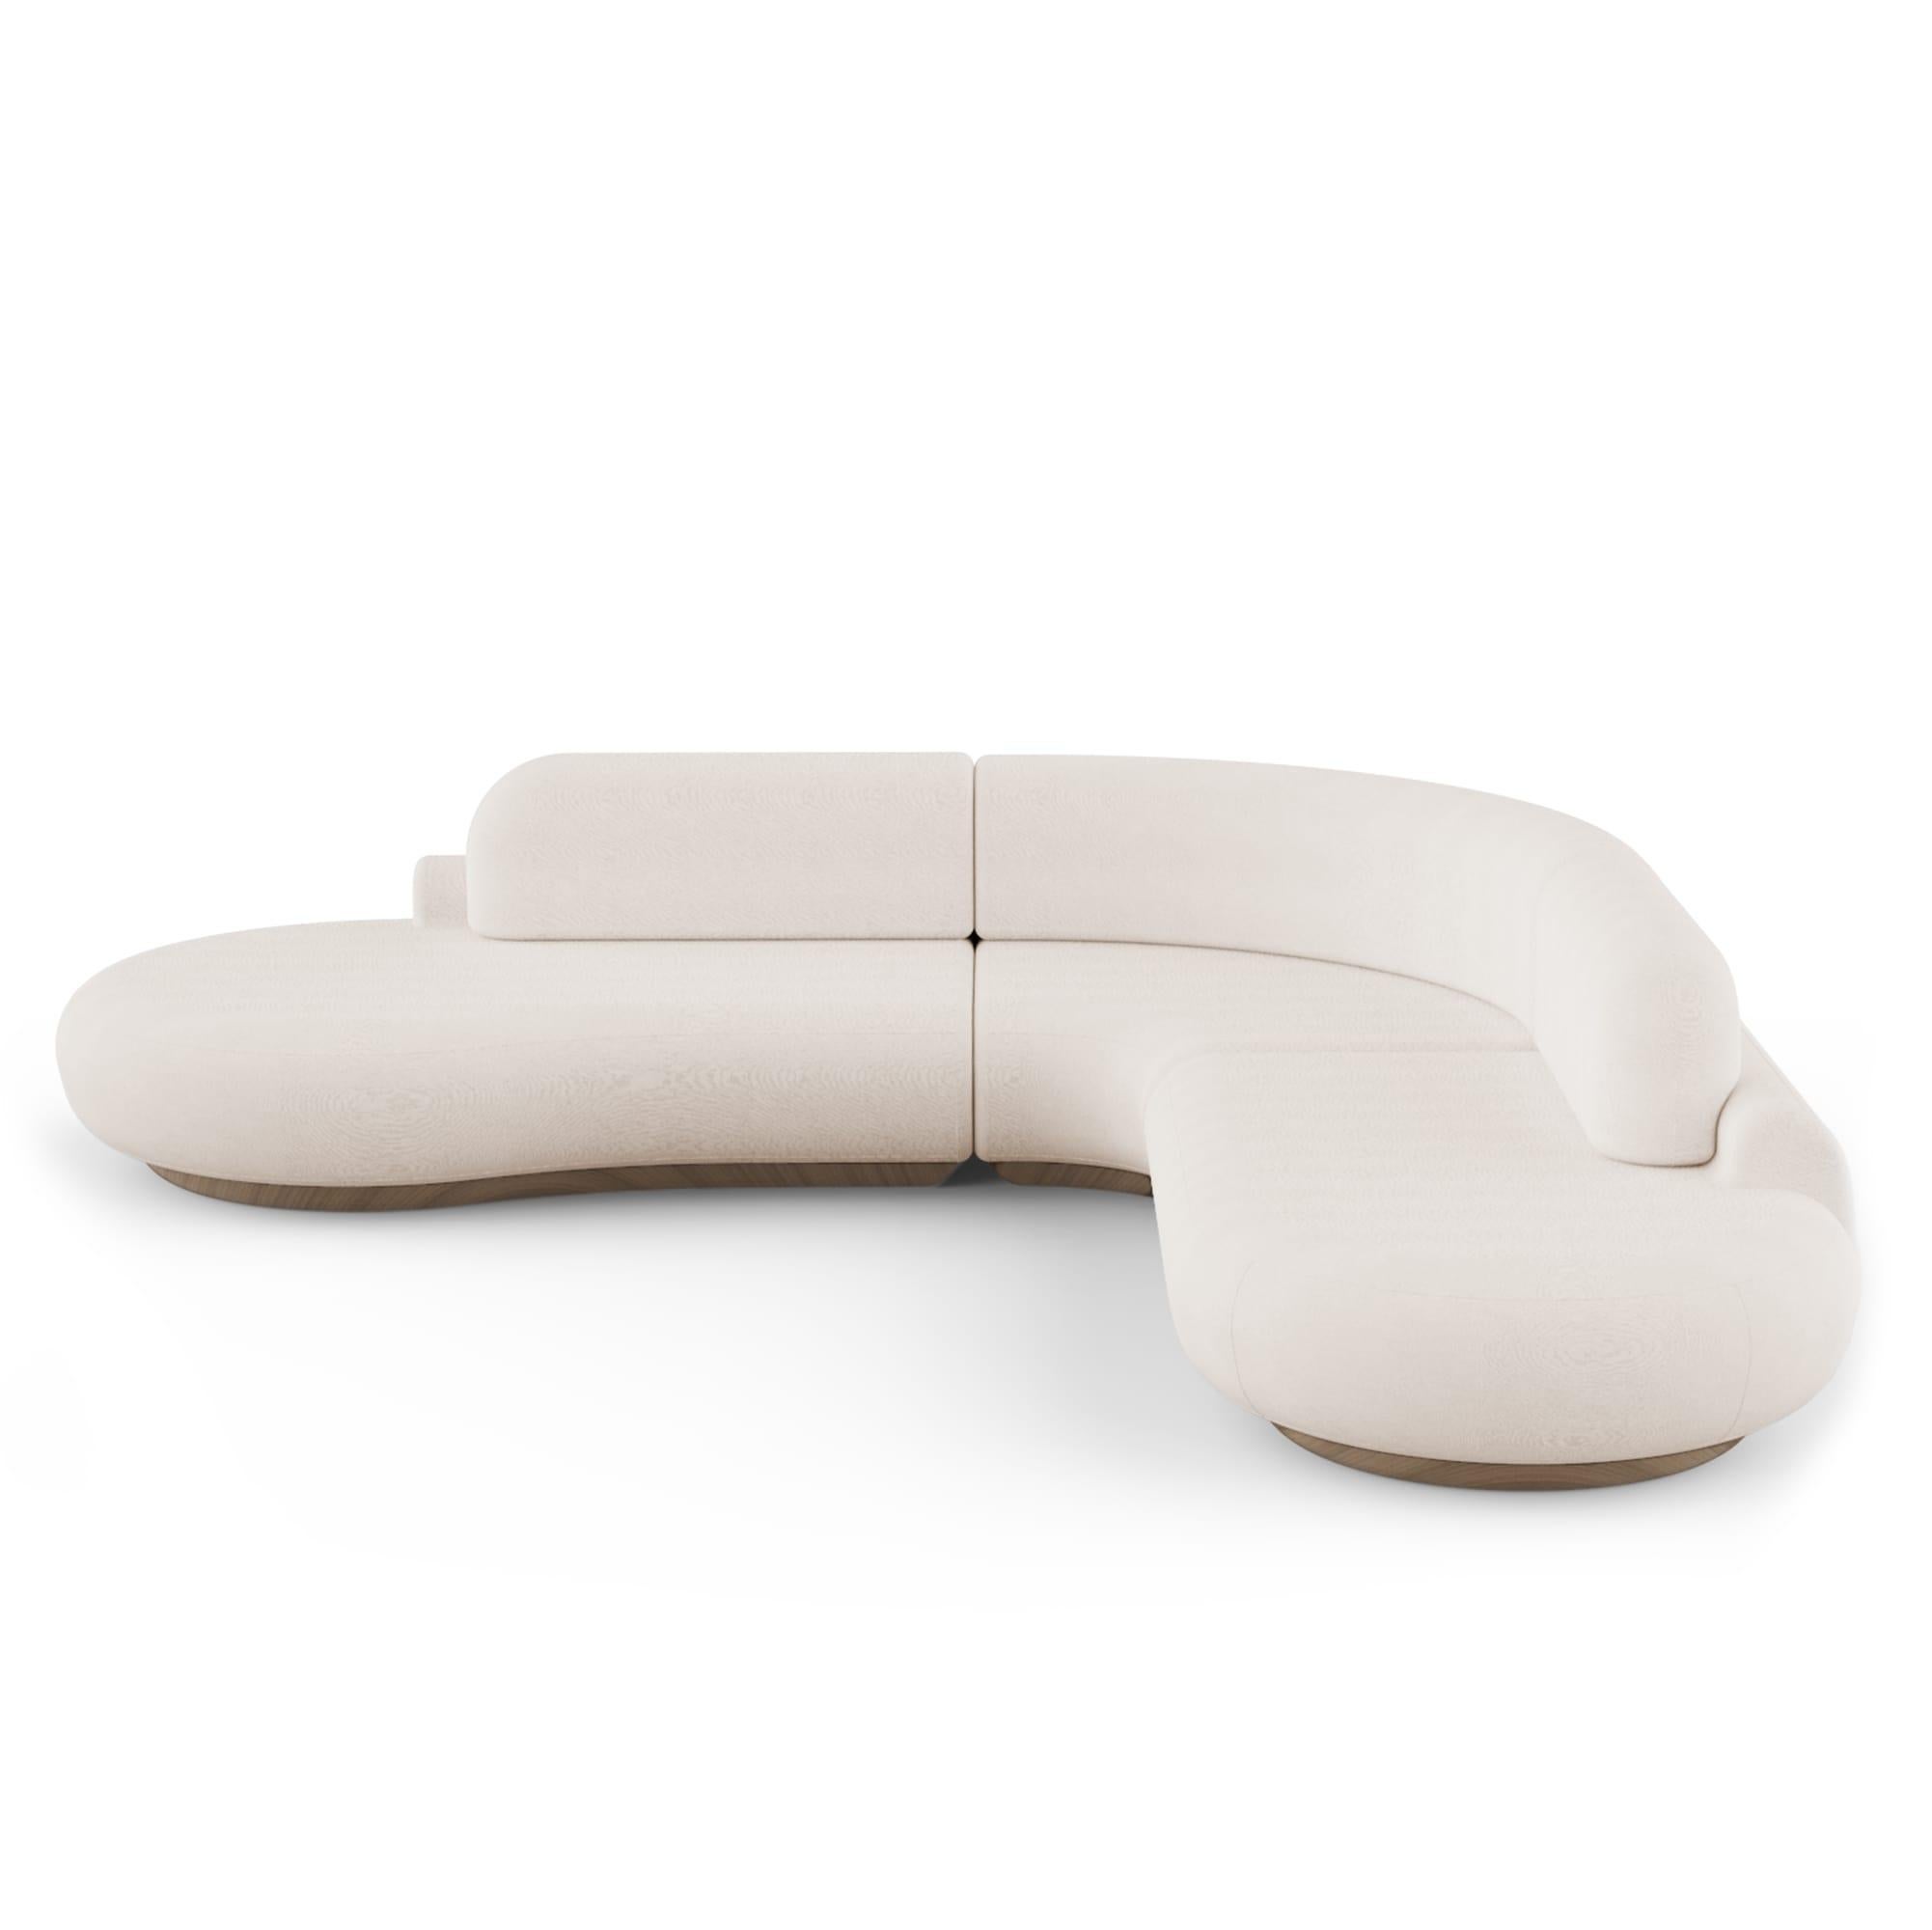 Naked sofa by Dooq
Dimensions: W 312 x D 332 x H 78 cm
 Seat height 40 cm
Materials: Base beechwood
 Upholstery Smooth Velvet 
 Also avalaible in Synthetic Leather

Naked sofa reveals sculptural and organic shape meant to embrace the user and